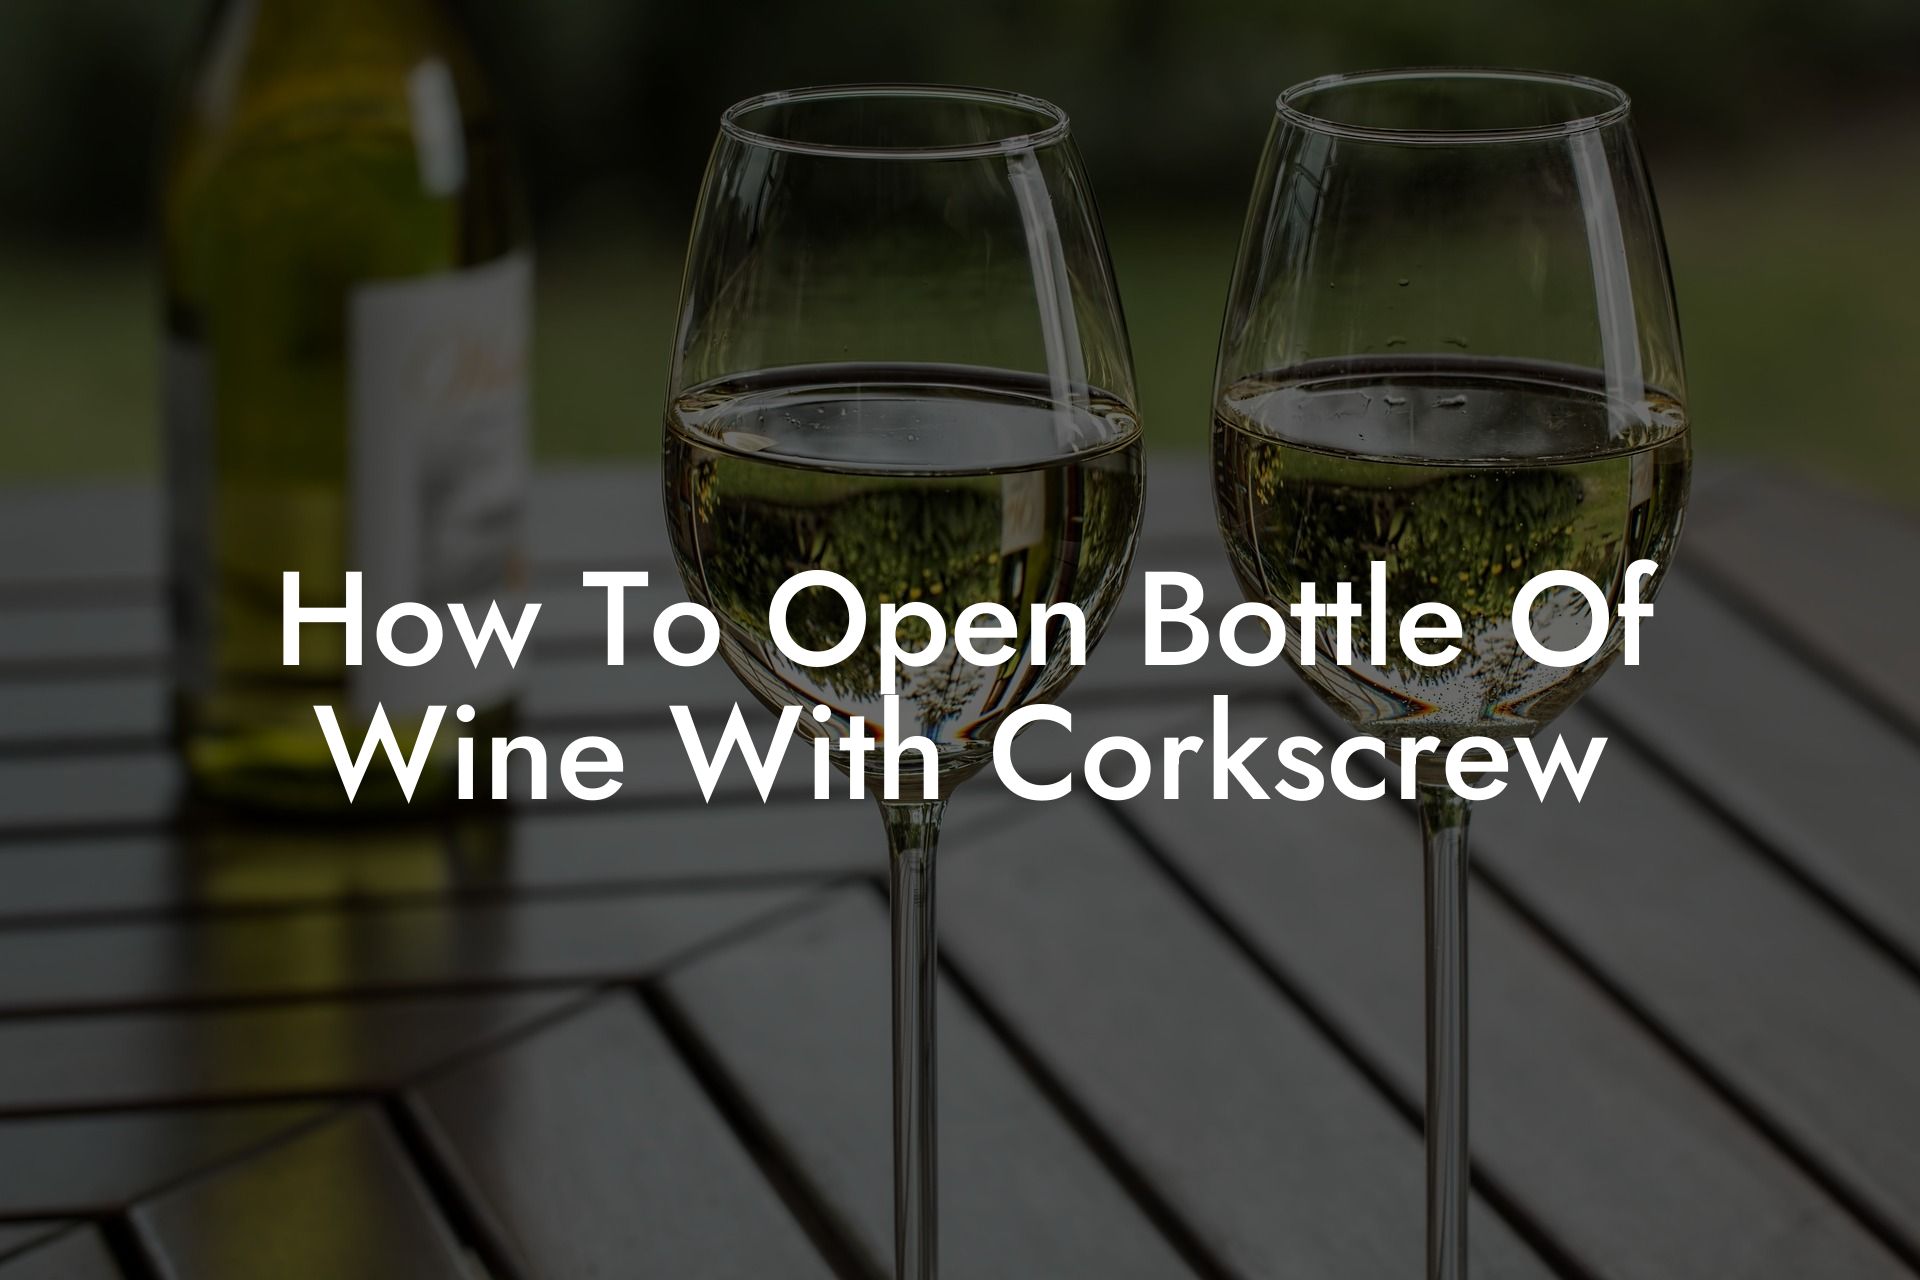 How To Open Bottle Of Wine With Corkscrew